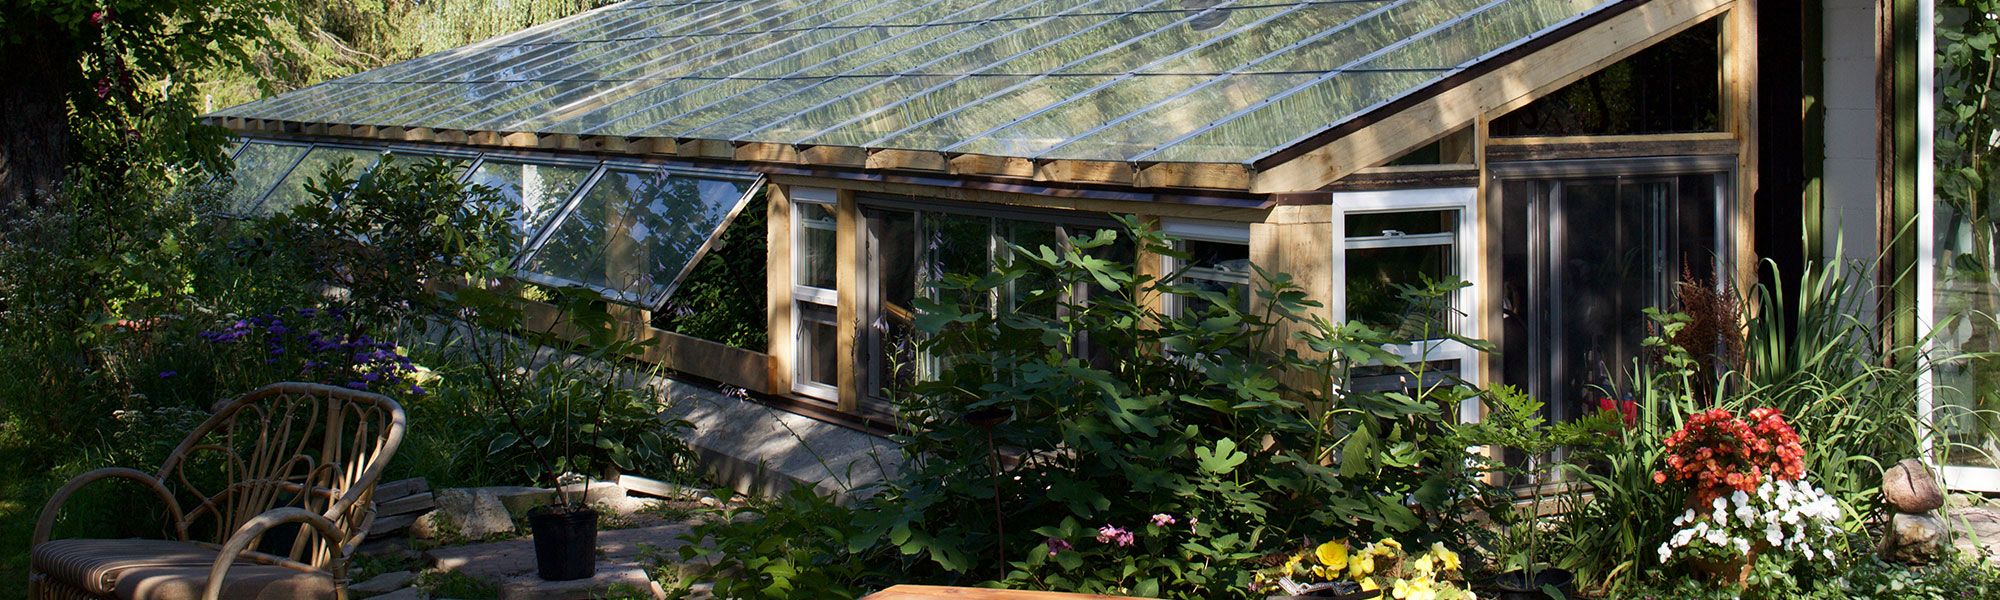 Permaculture in Greenhouse